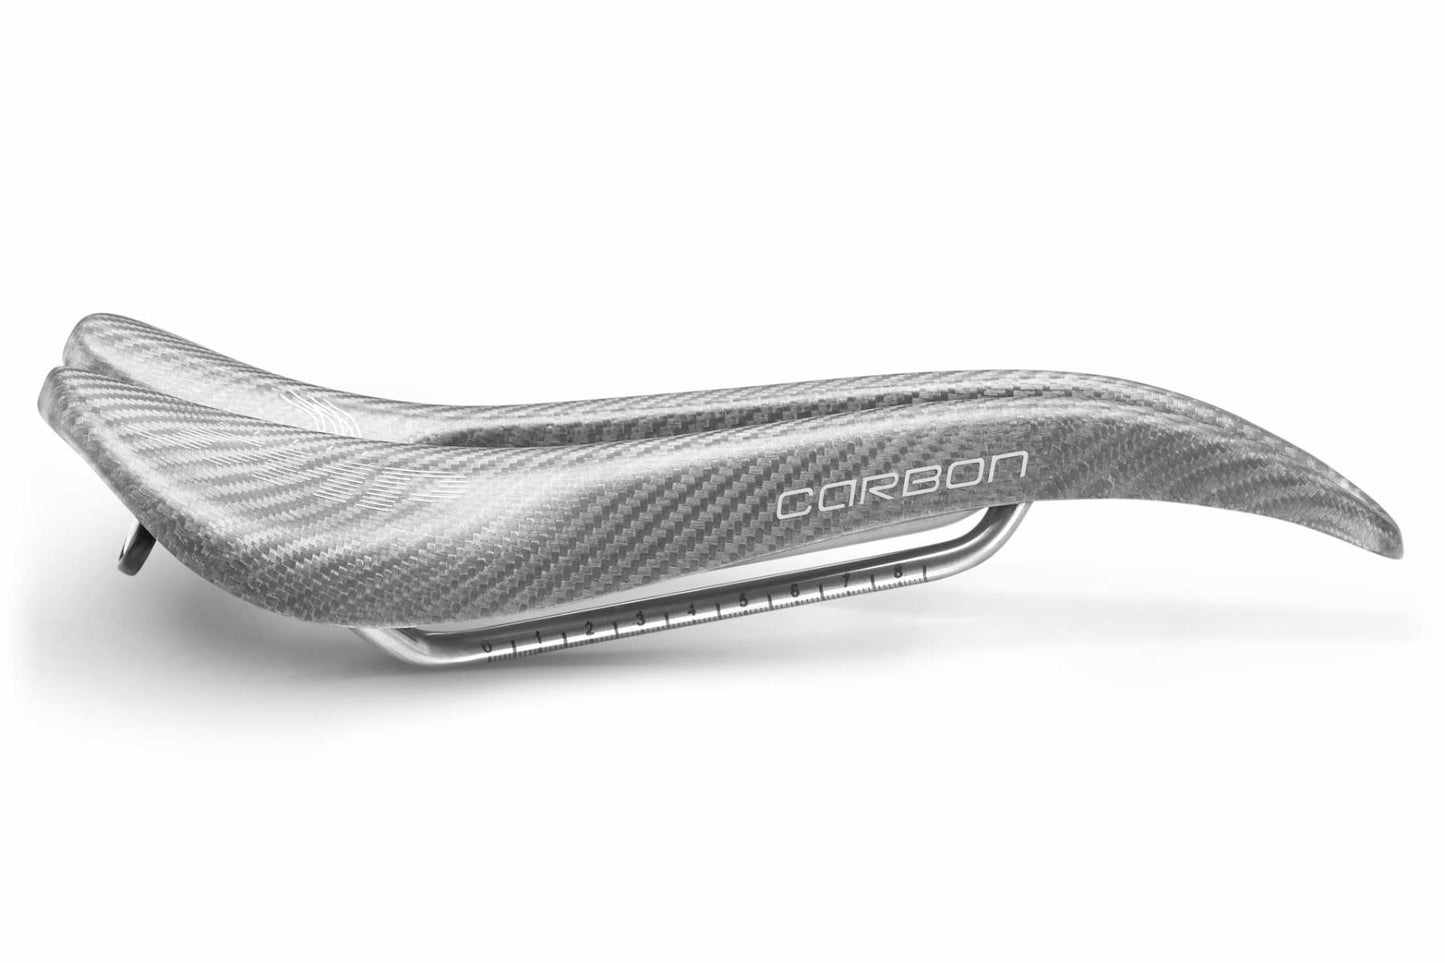 Selle SMP Carbon Saddle (Silver) ZSTRCARBONS